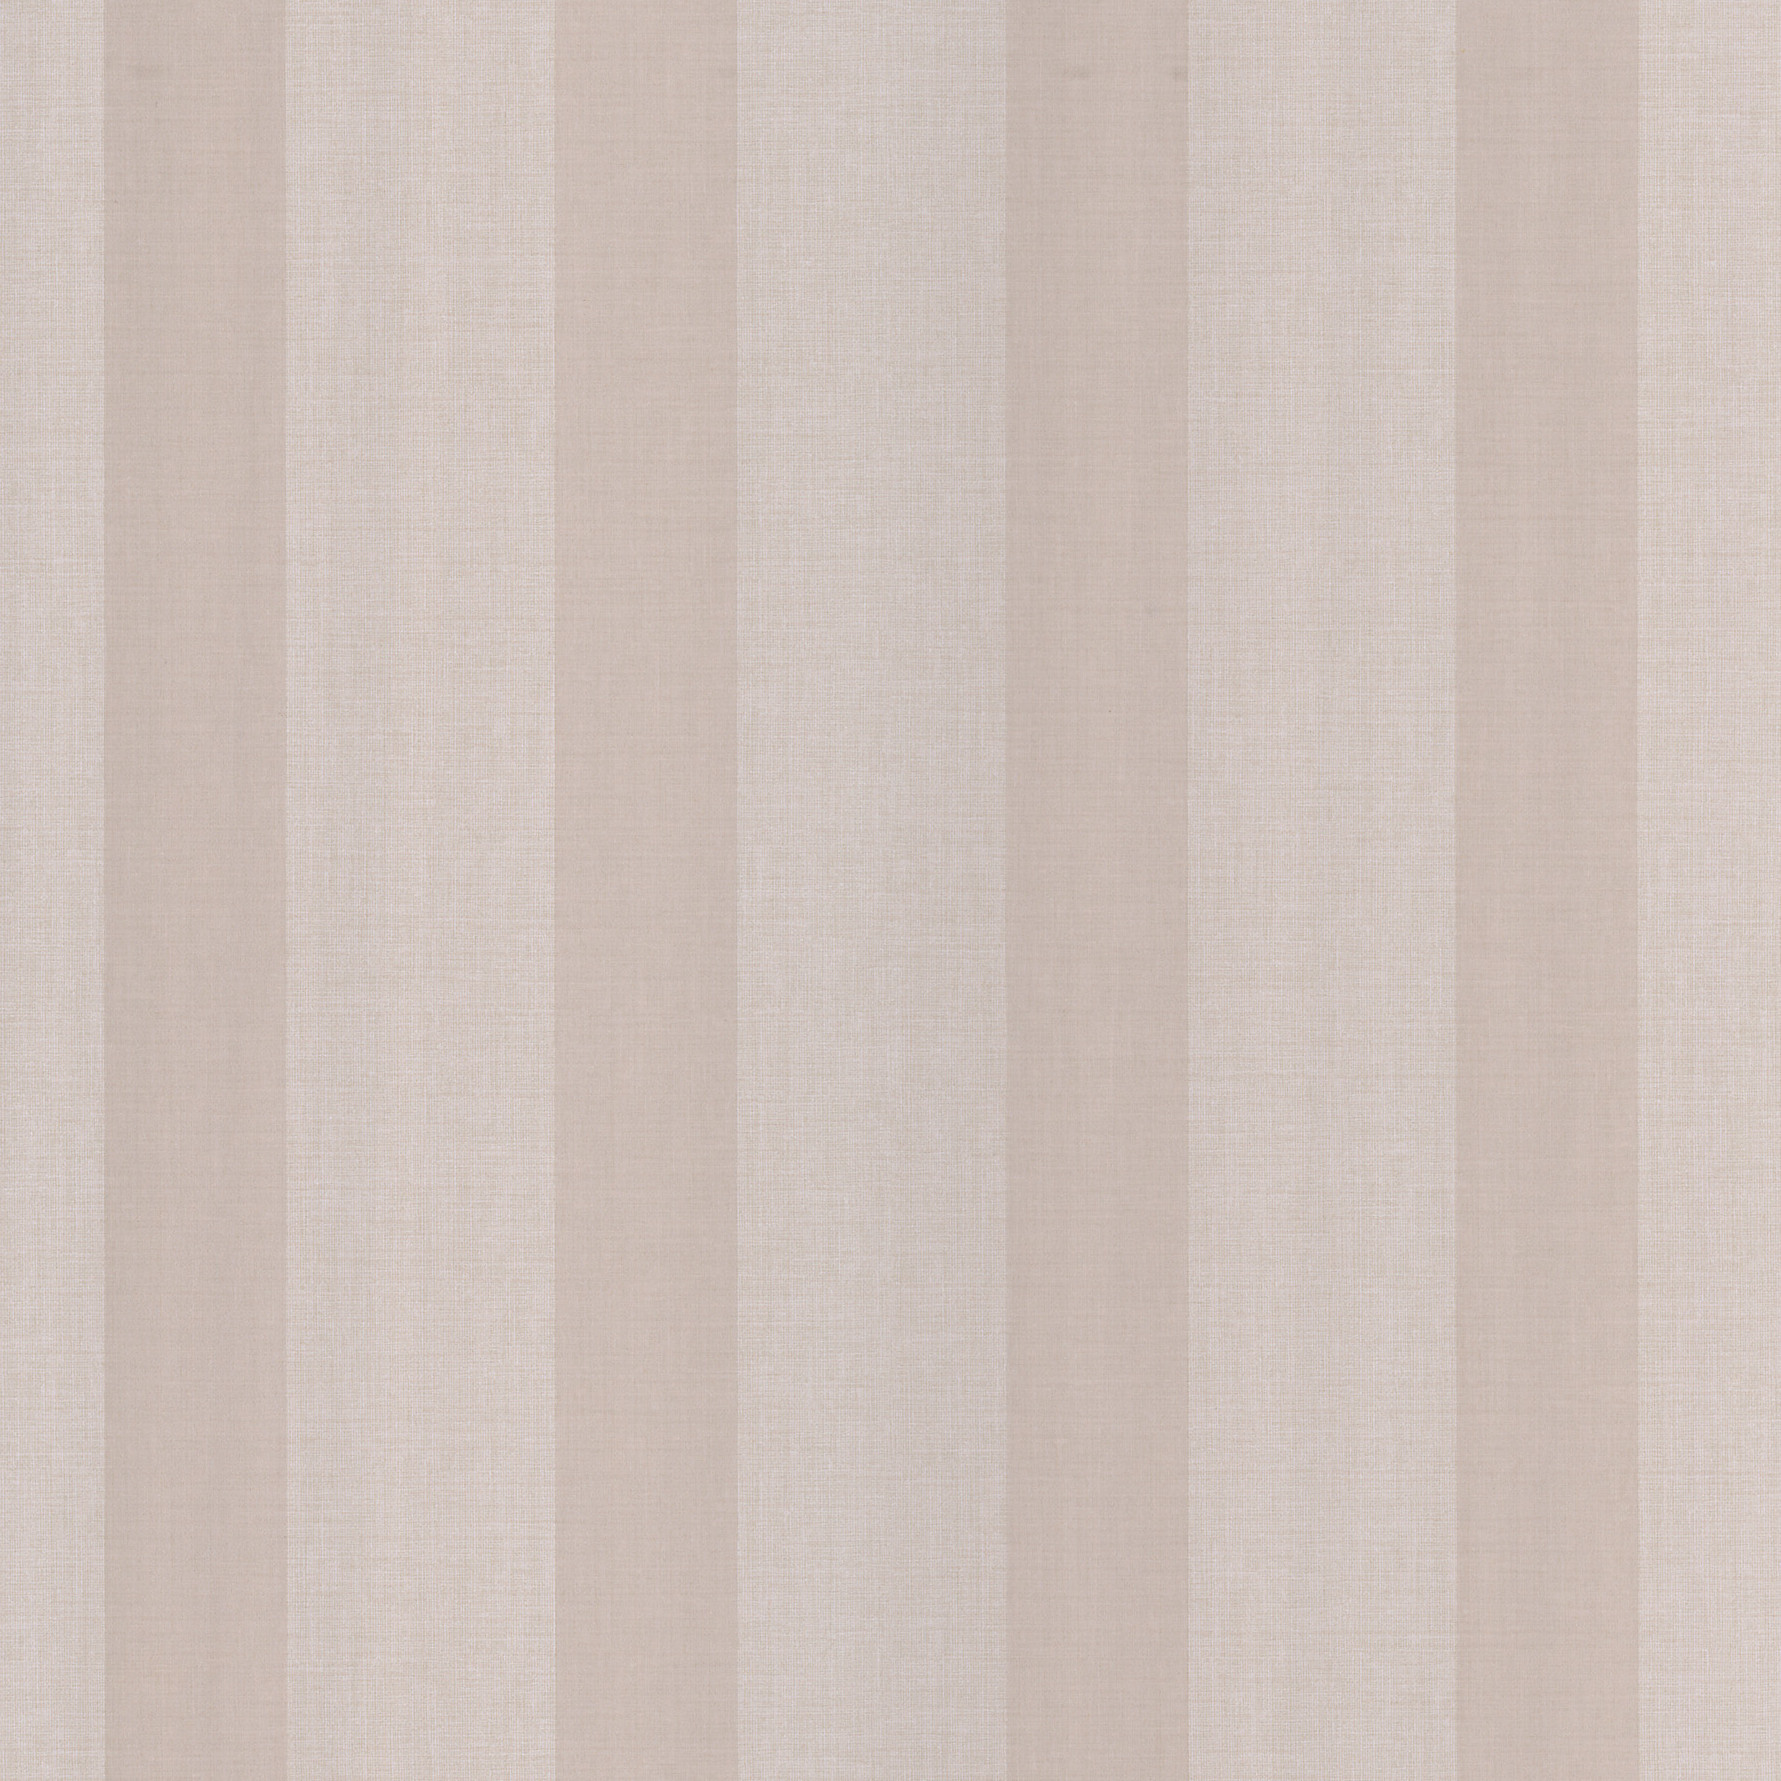 Brewster Home Fashions X Stripes 3d Embossed Wallpaper